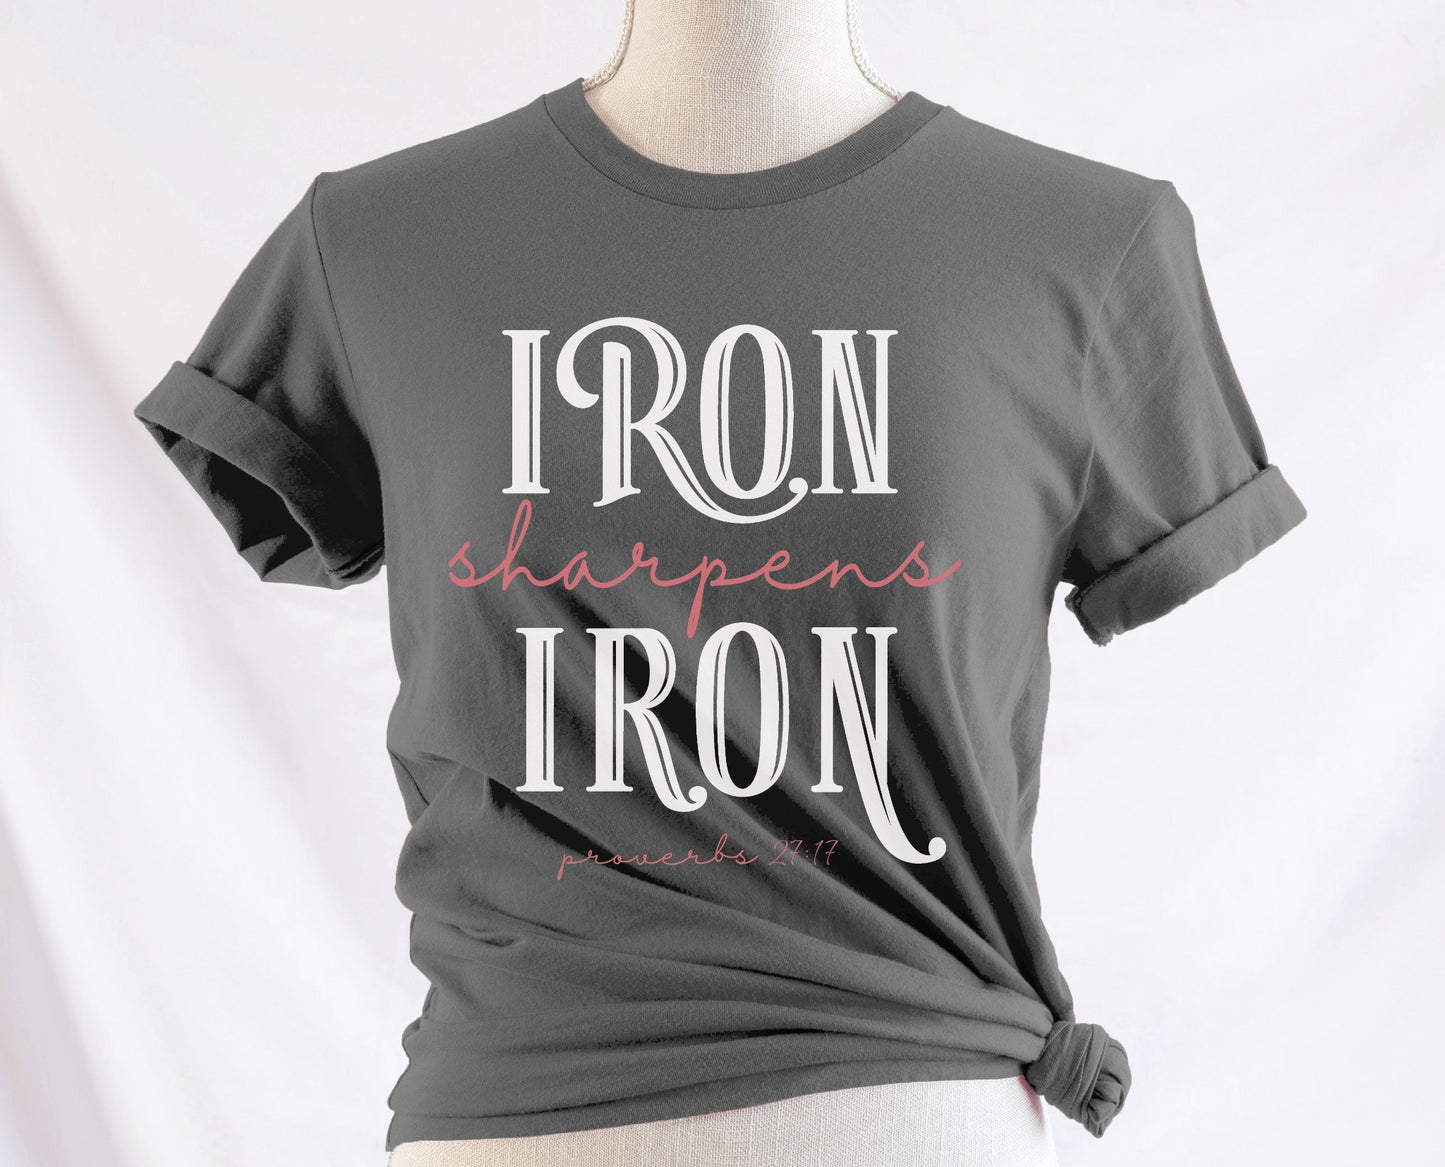 Iron Sharpens Iron Proverbs 27:17 Christian aesthetic design printed in white and mauve on ladies soft asphalt gray unisex t-shirt for women's groups